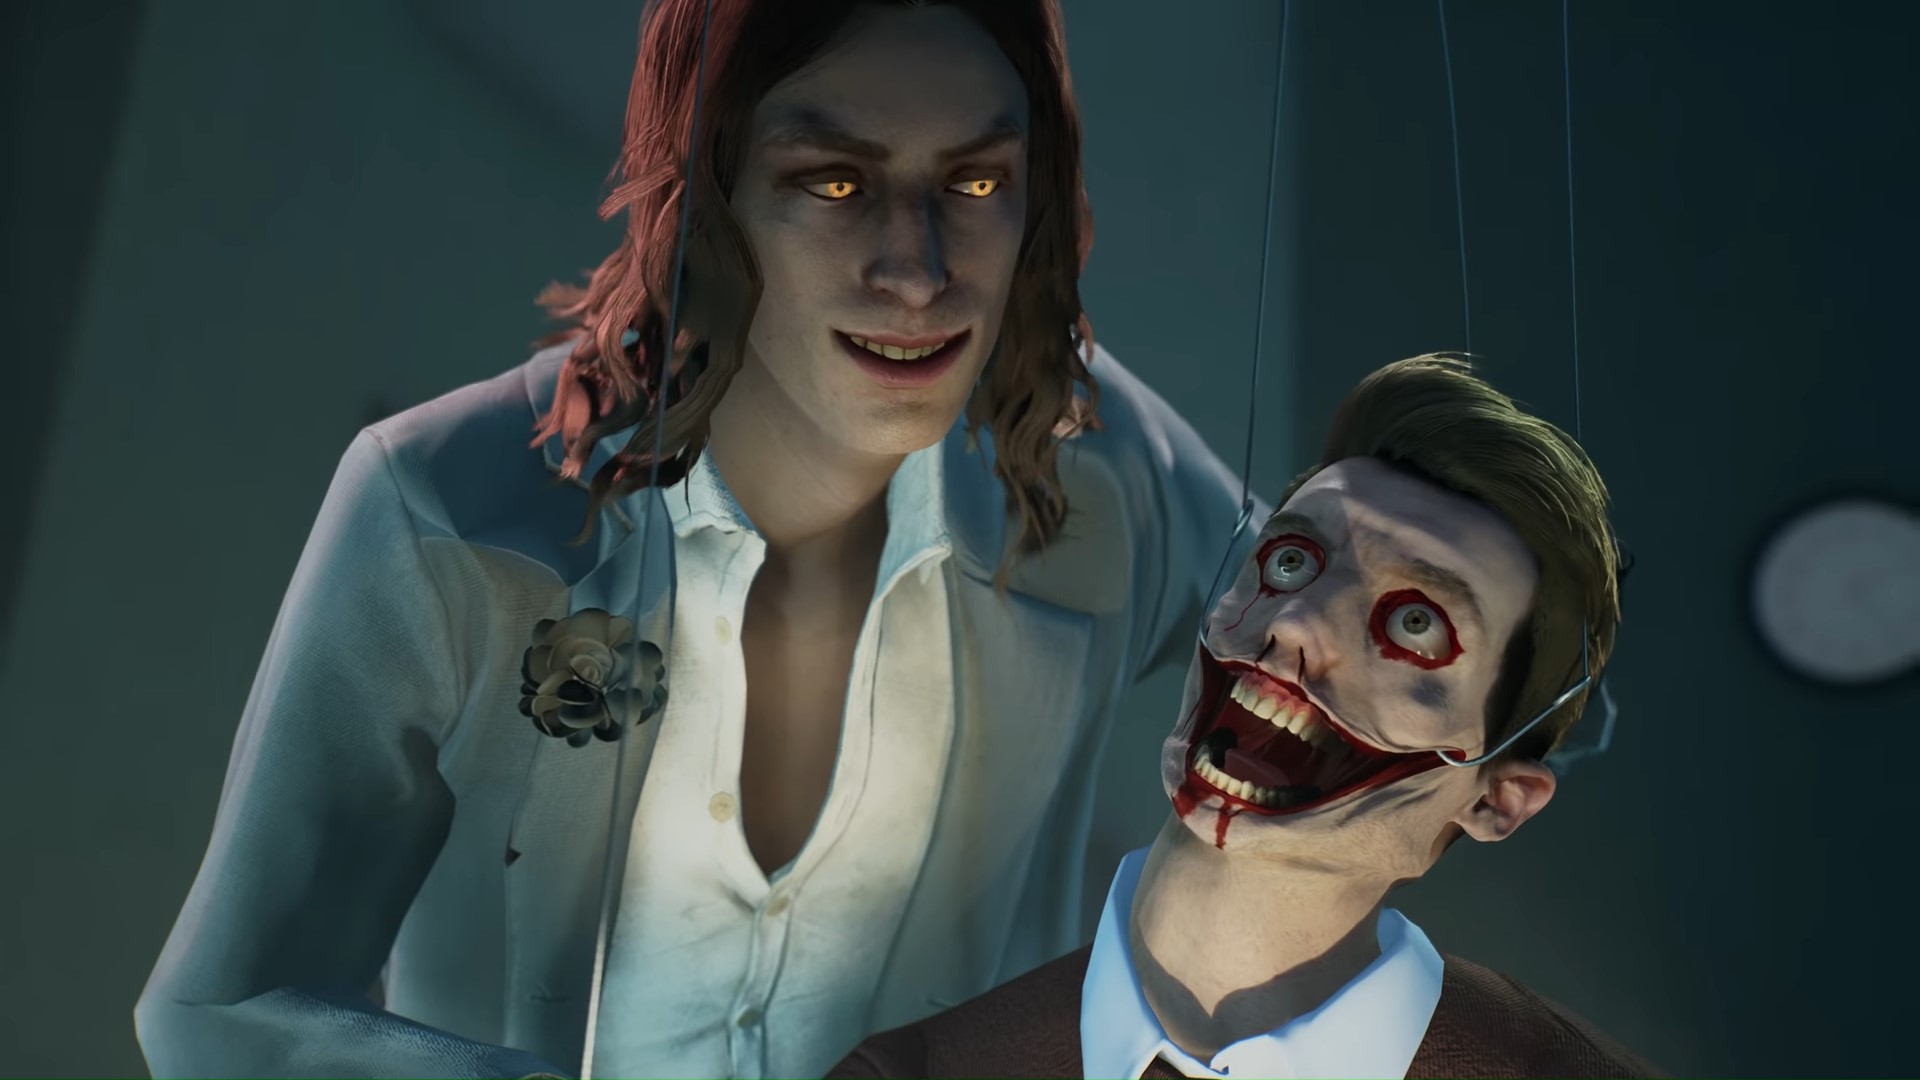 First official screenshots for Vampire: The Masquerade - Bloodlines 2